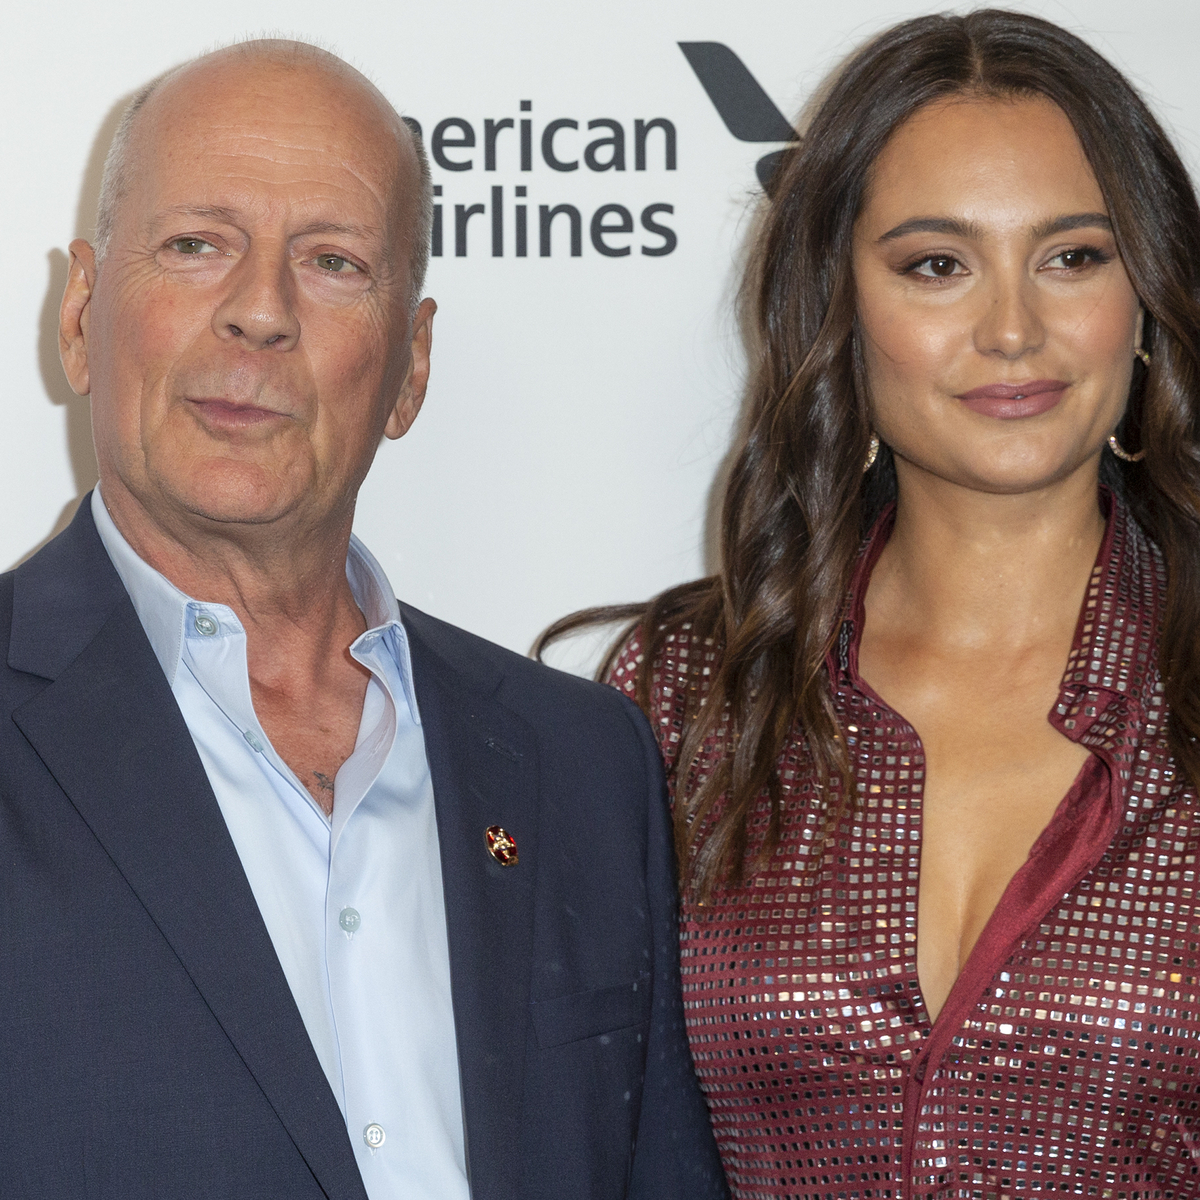 Bruce Willis’ Wife Emma Heming Shares Why She’s “Not Good”